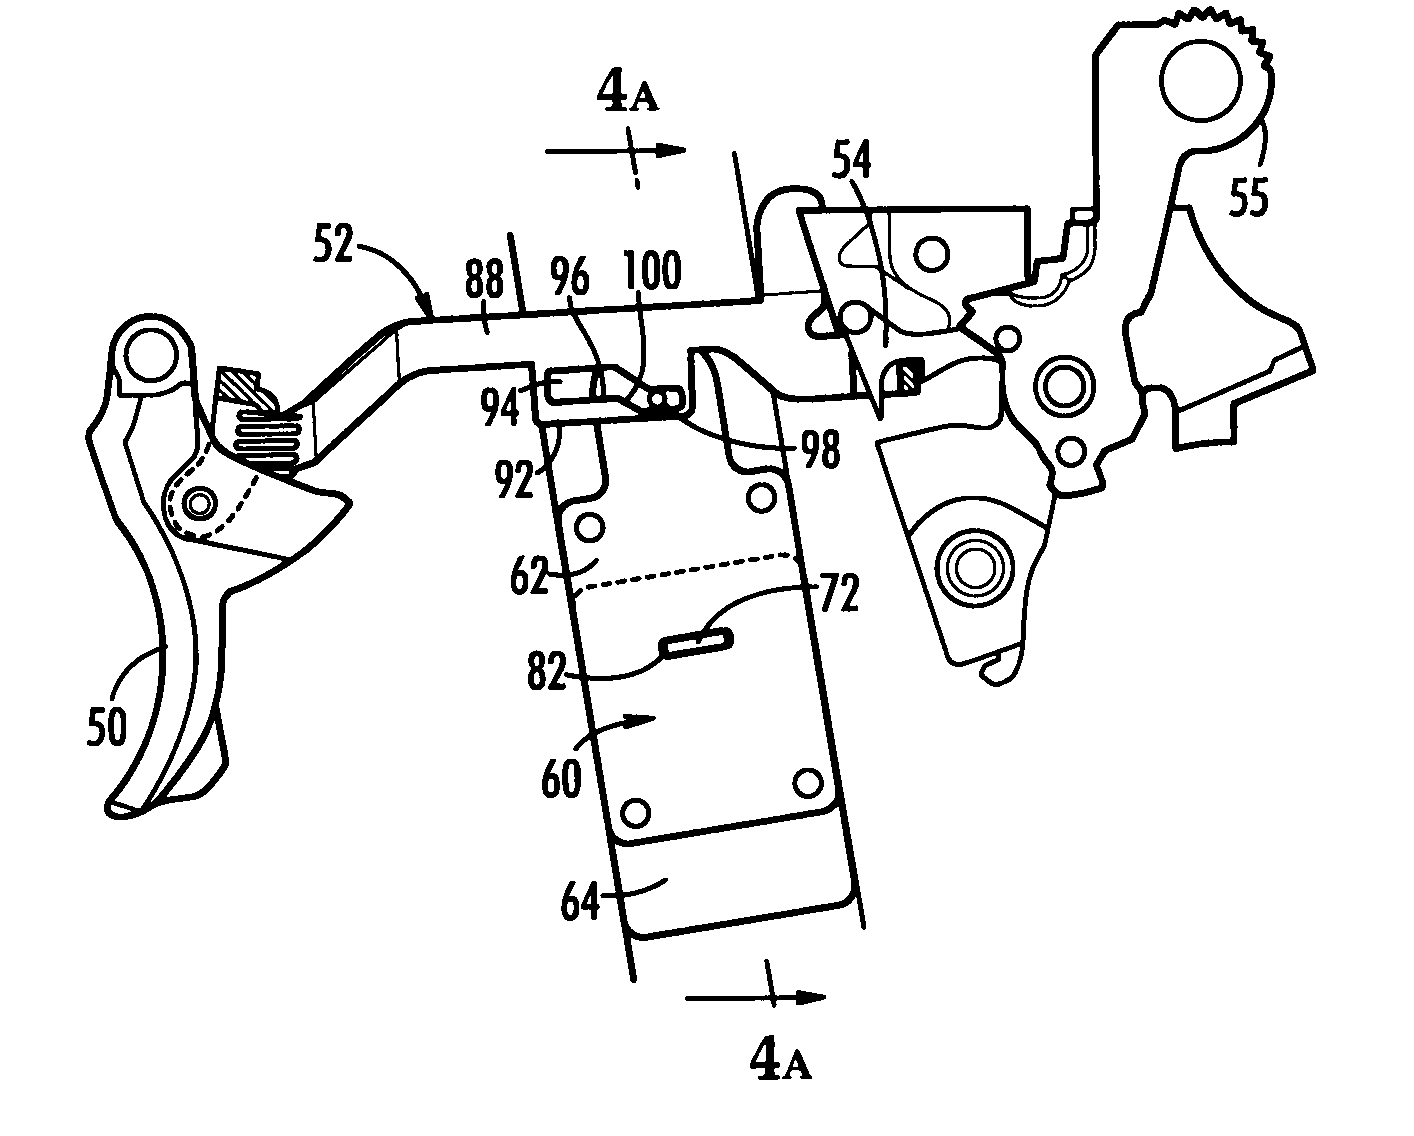 Firearm authorization system with piezo-electric disabler